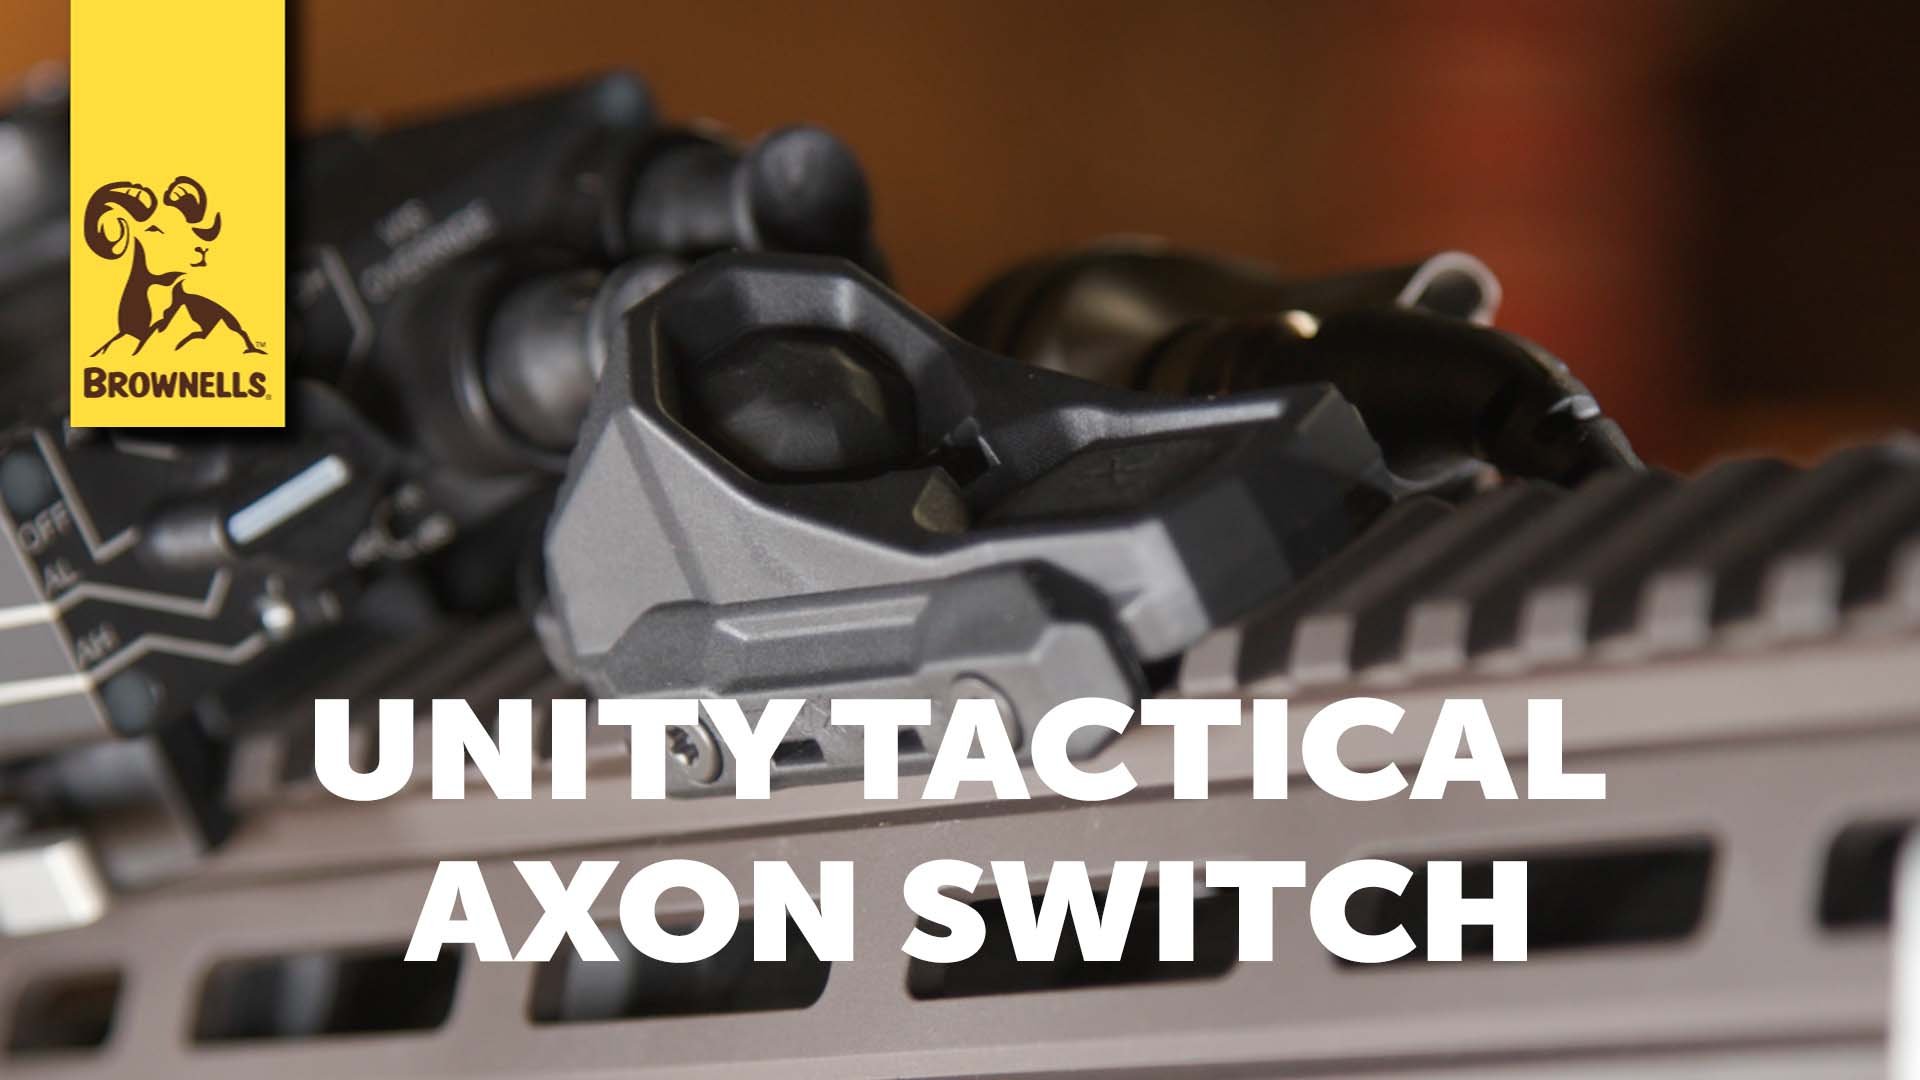 Product Spotlight: Unity Tactical AXON Remote Switch